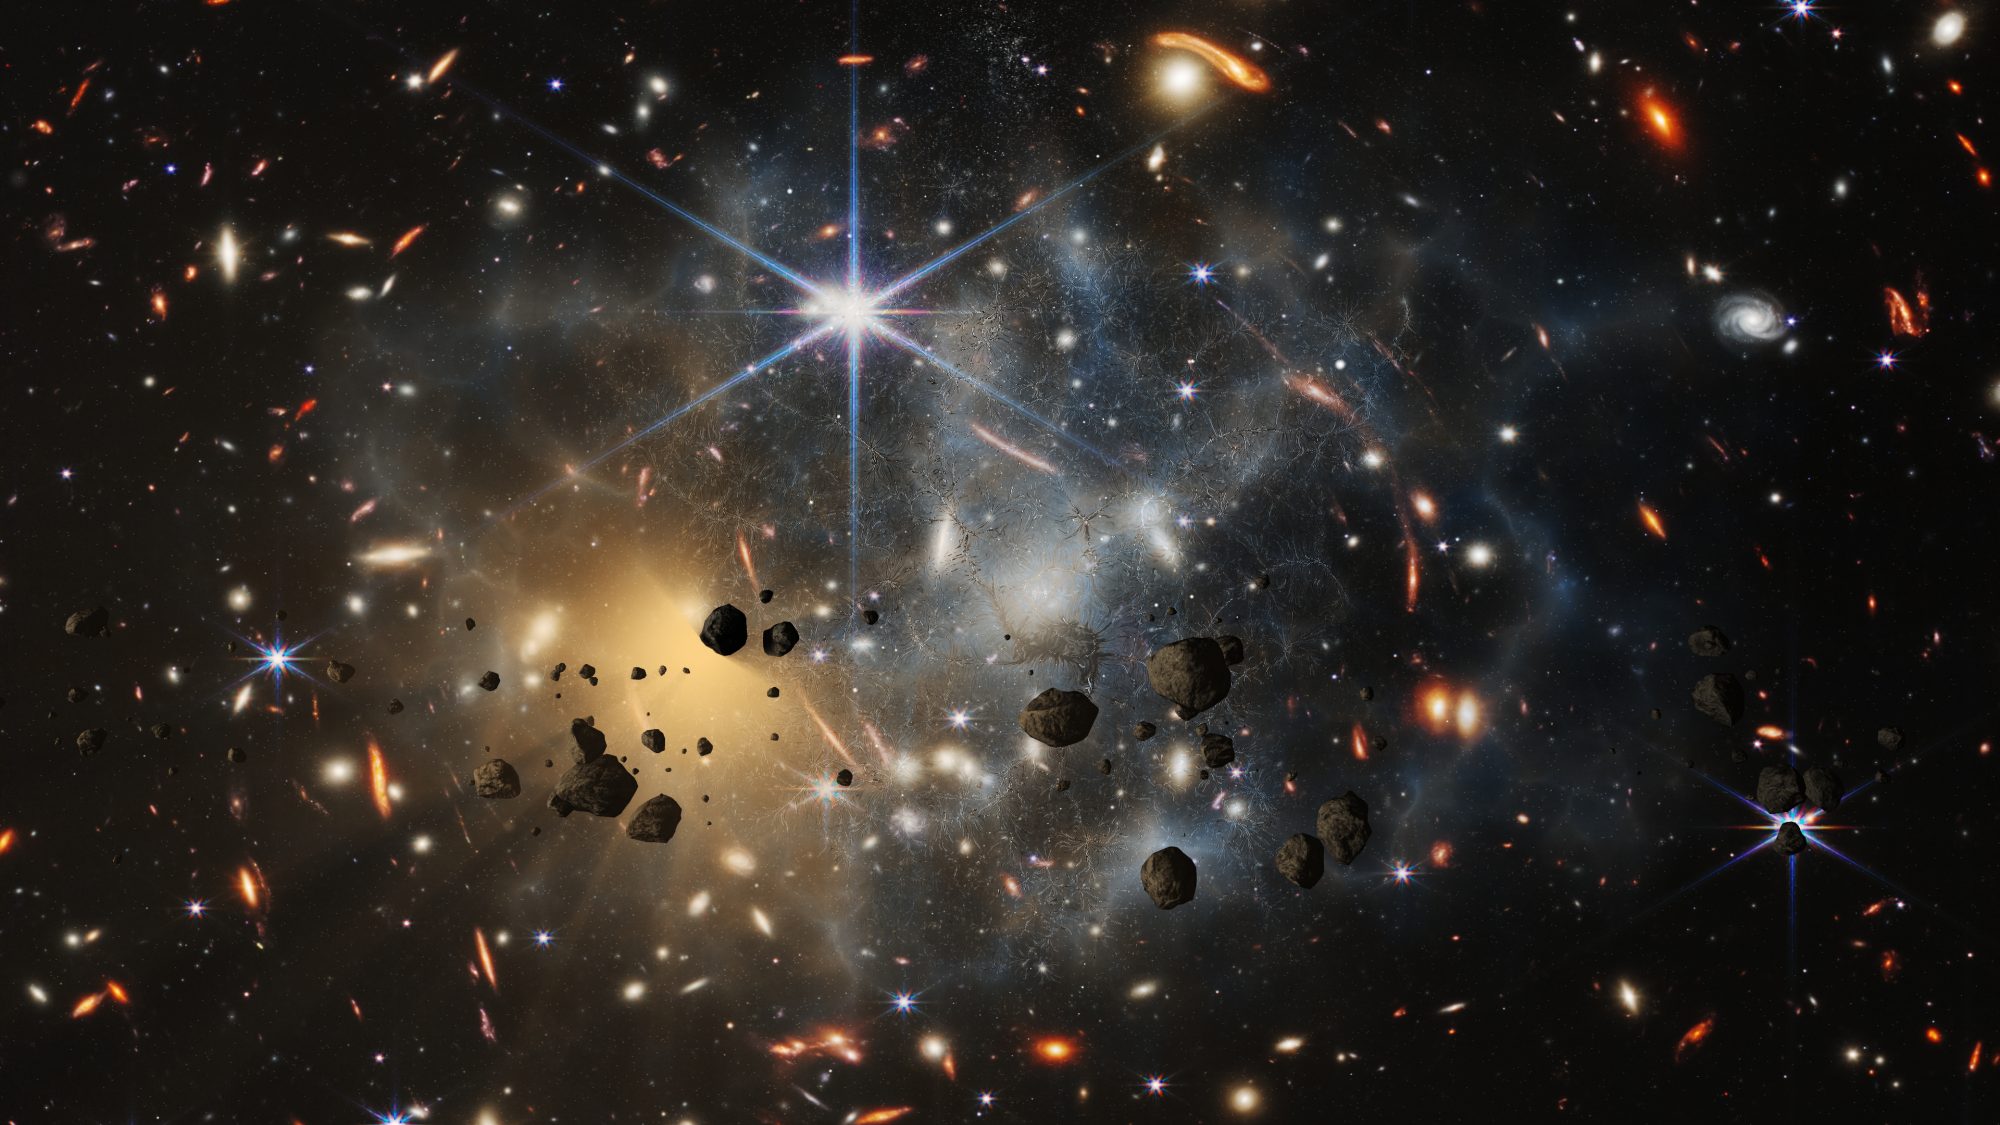 JWST and NASA: Understanding star formation in the early universe